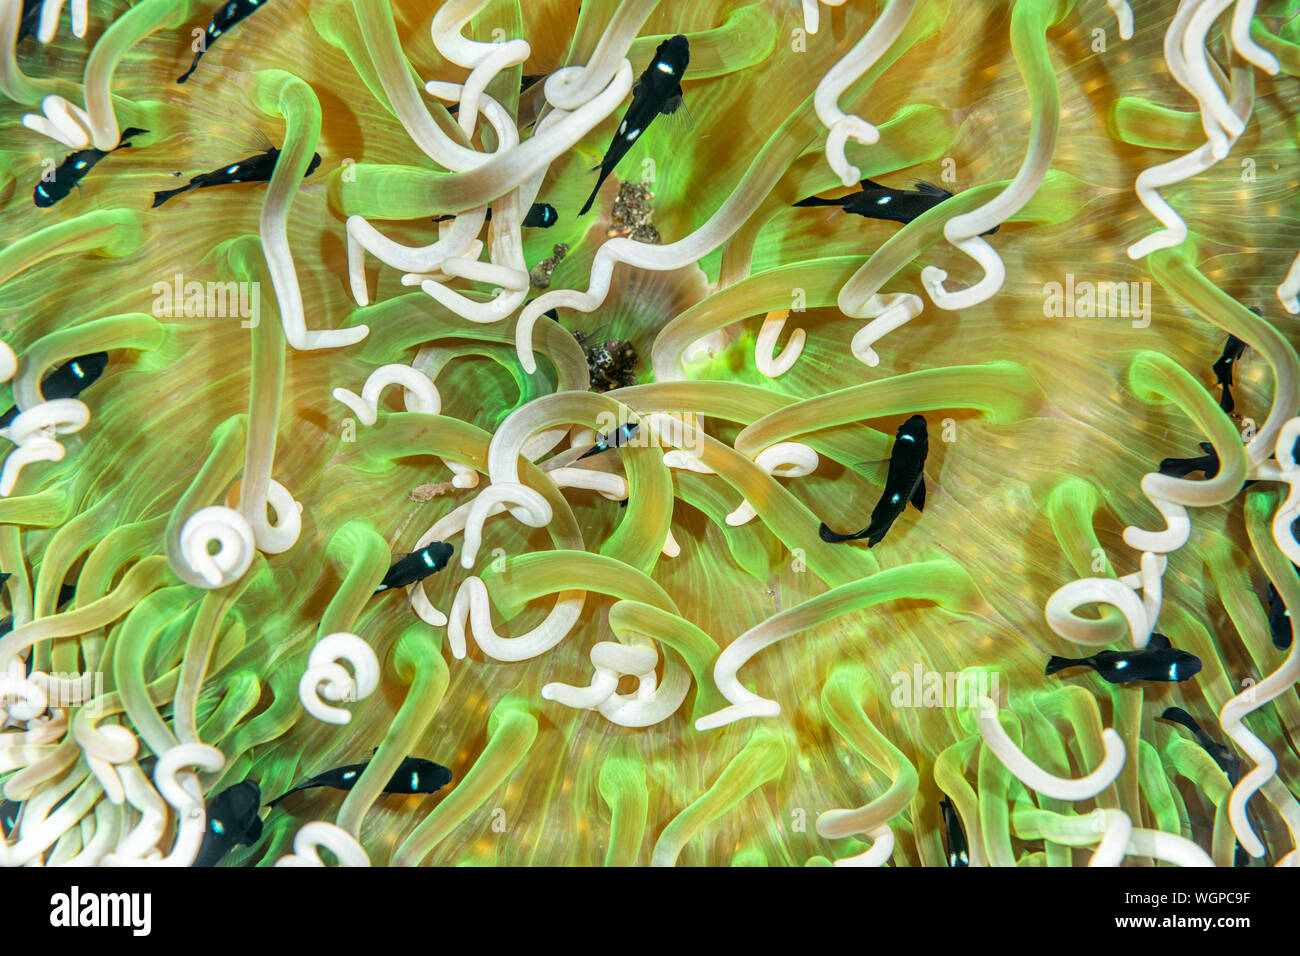 Small domino fish swim within the tentacles of a protective sea anemone. Stock Photo